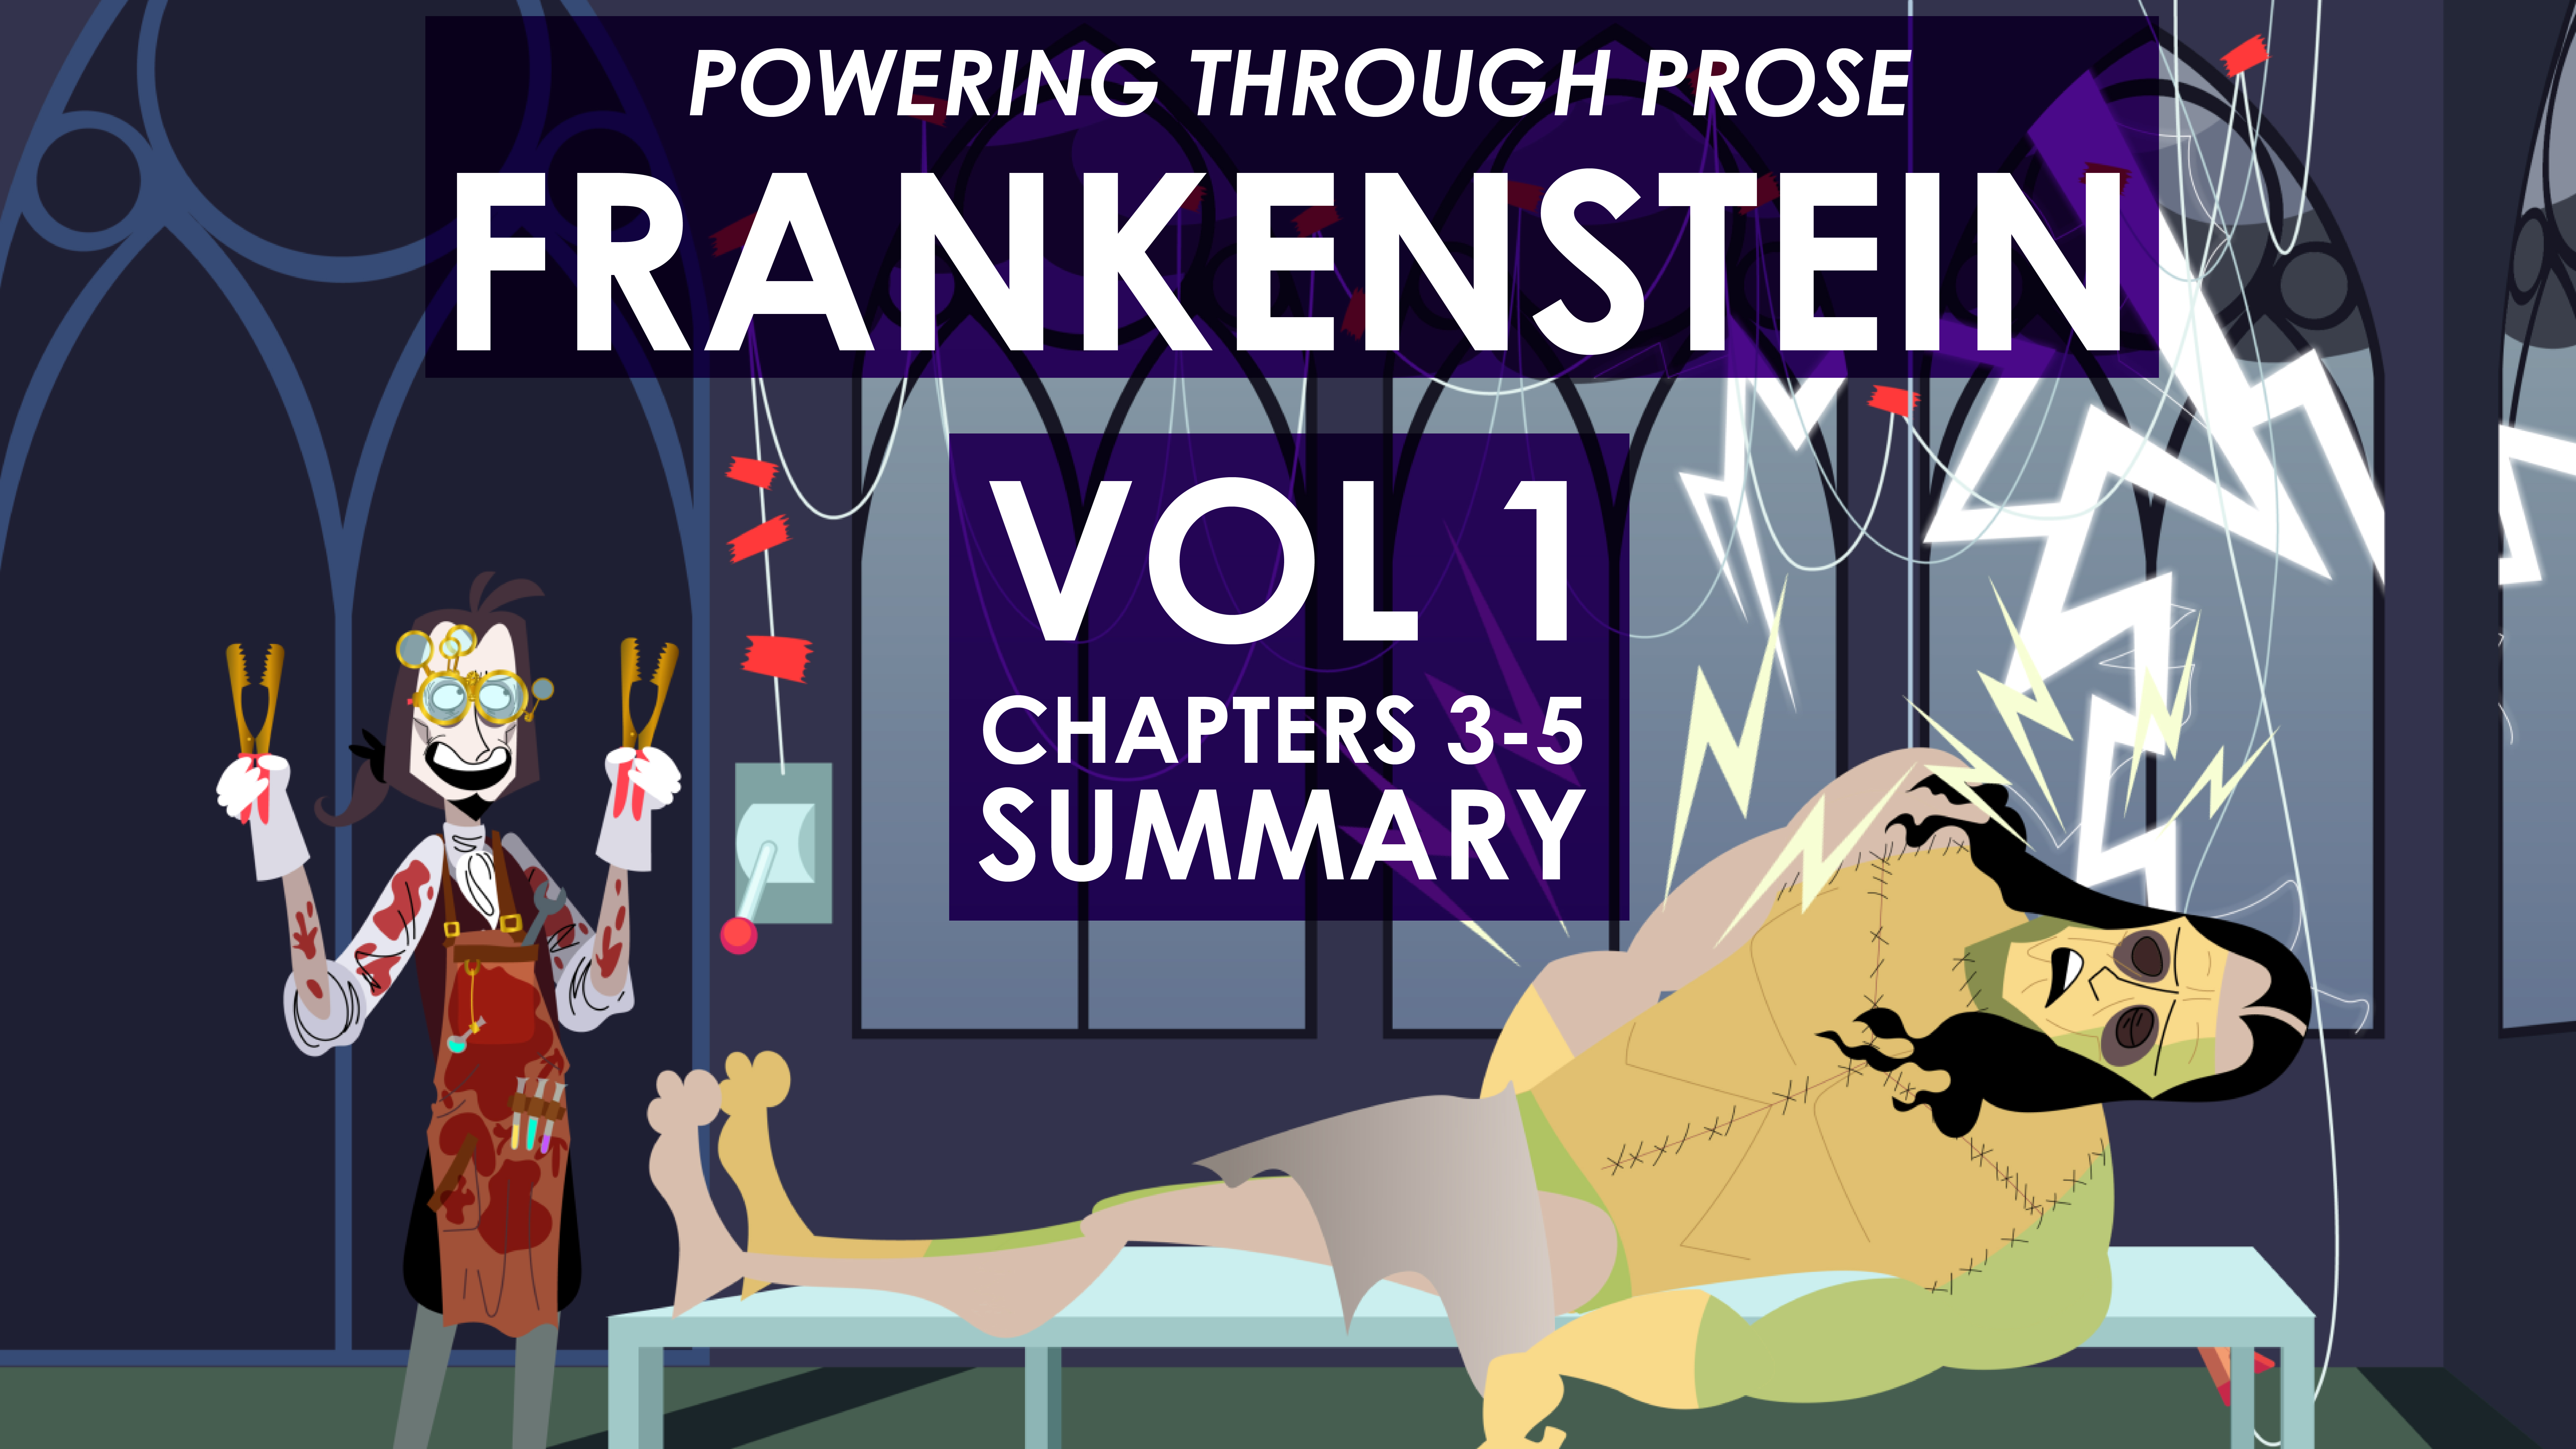 Frankenstein - Mary Shelley - Chapters 3-5 - Powering Through Prose Series	